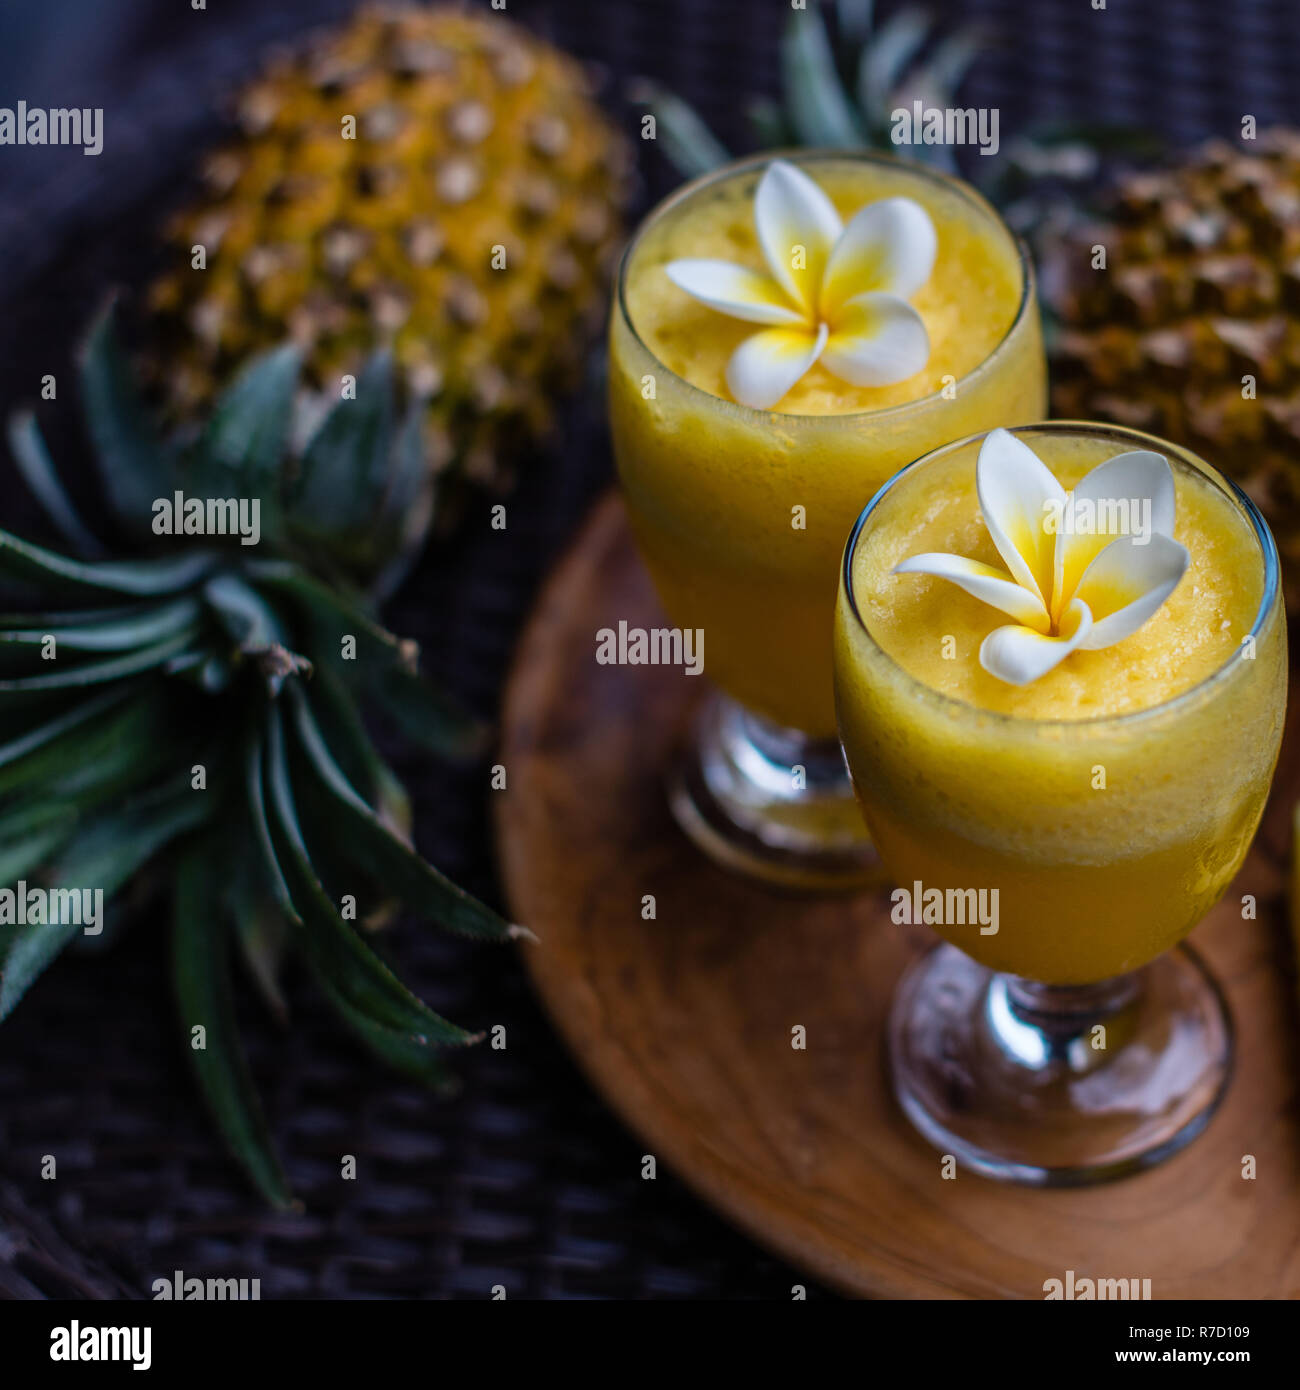 Two glasses of fresh pineapple juice decorated with Plumeria flowers, two whole pineapples and tree big cut pieces on a round wooden tray. Stock Photo